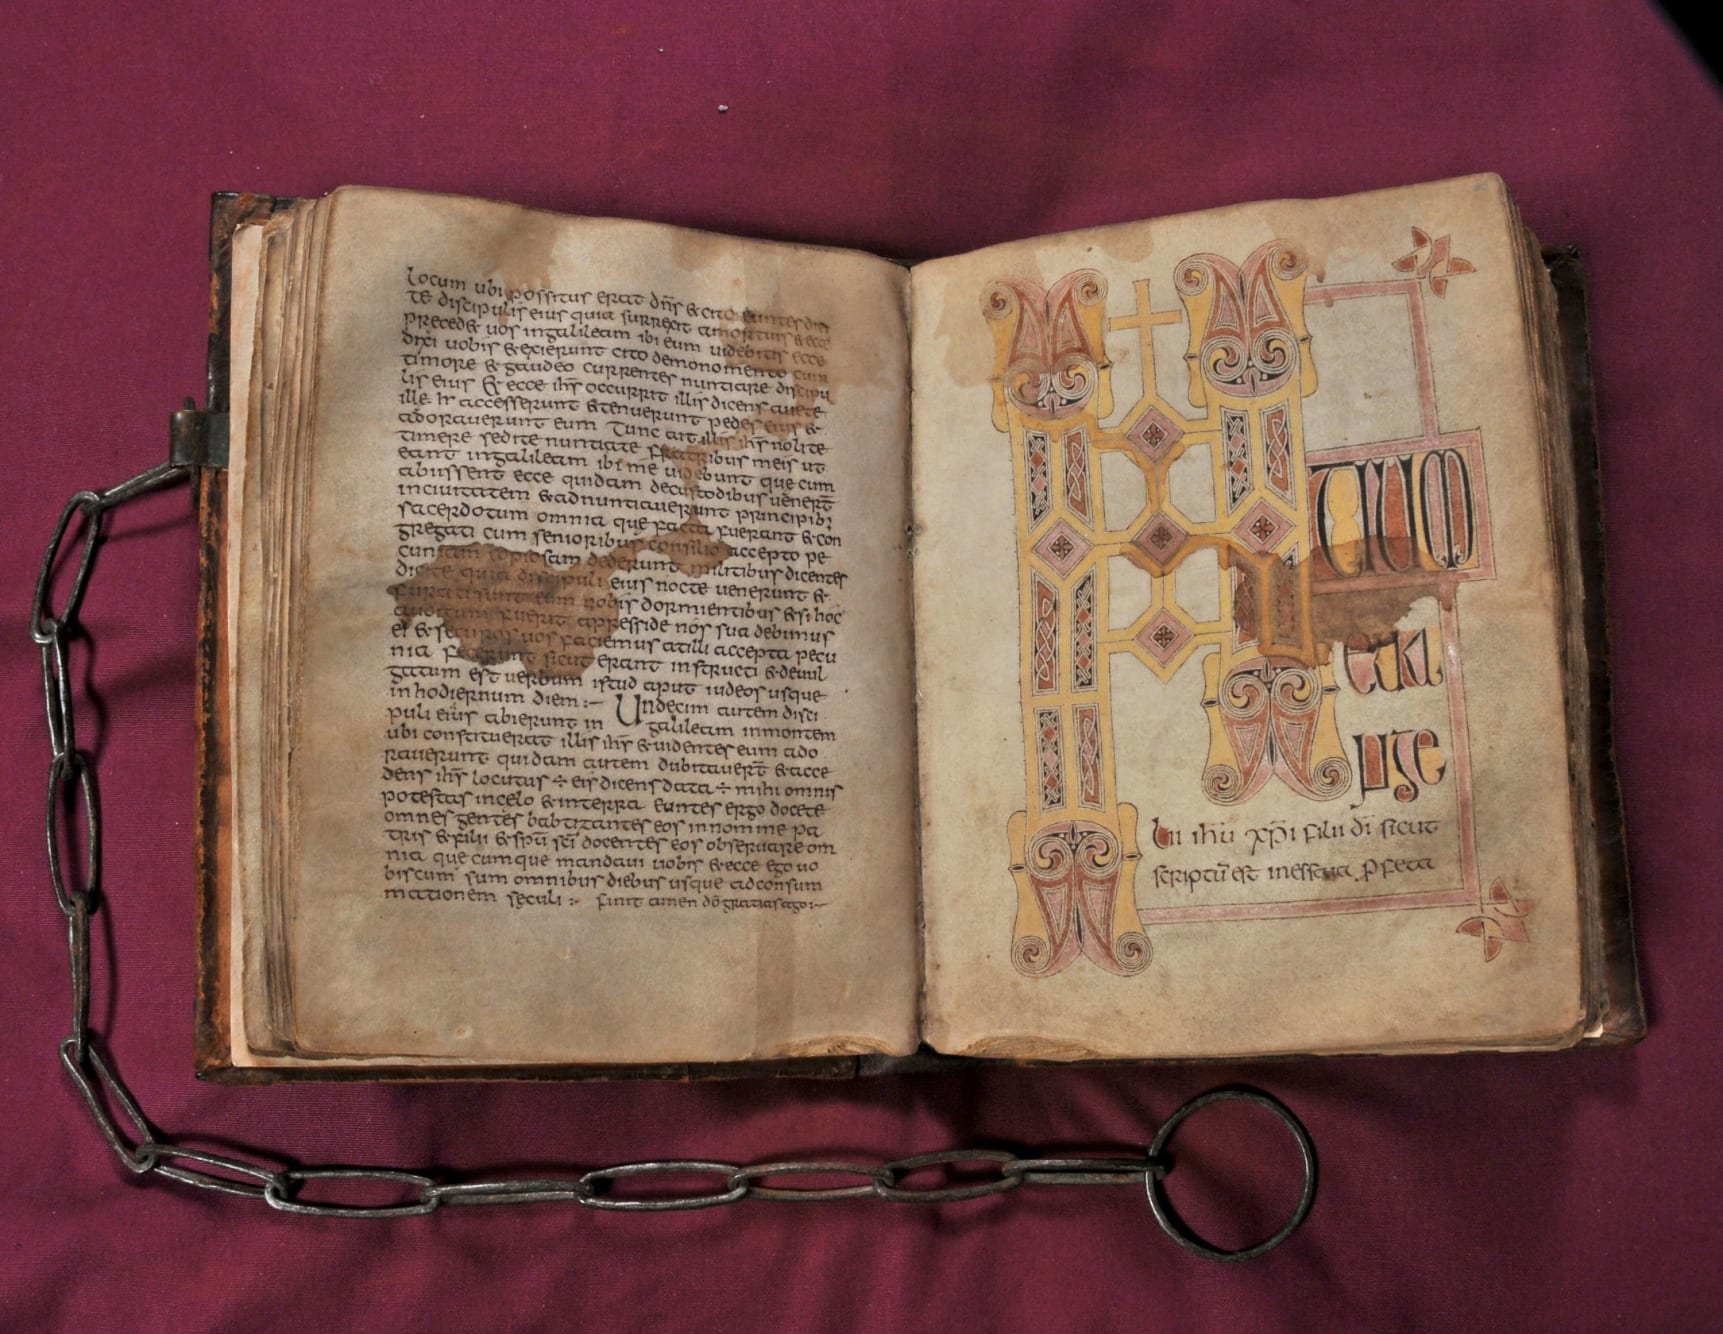 An open book with handwritten script on the left hand page and illustrations on the right. There is a chain attached to the spine of the book